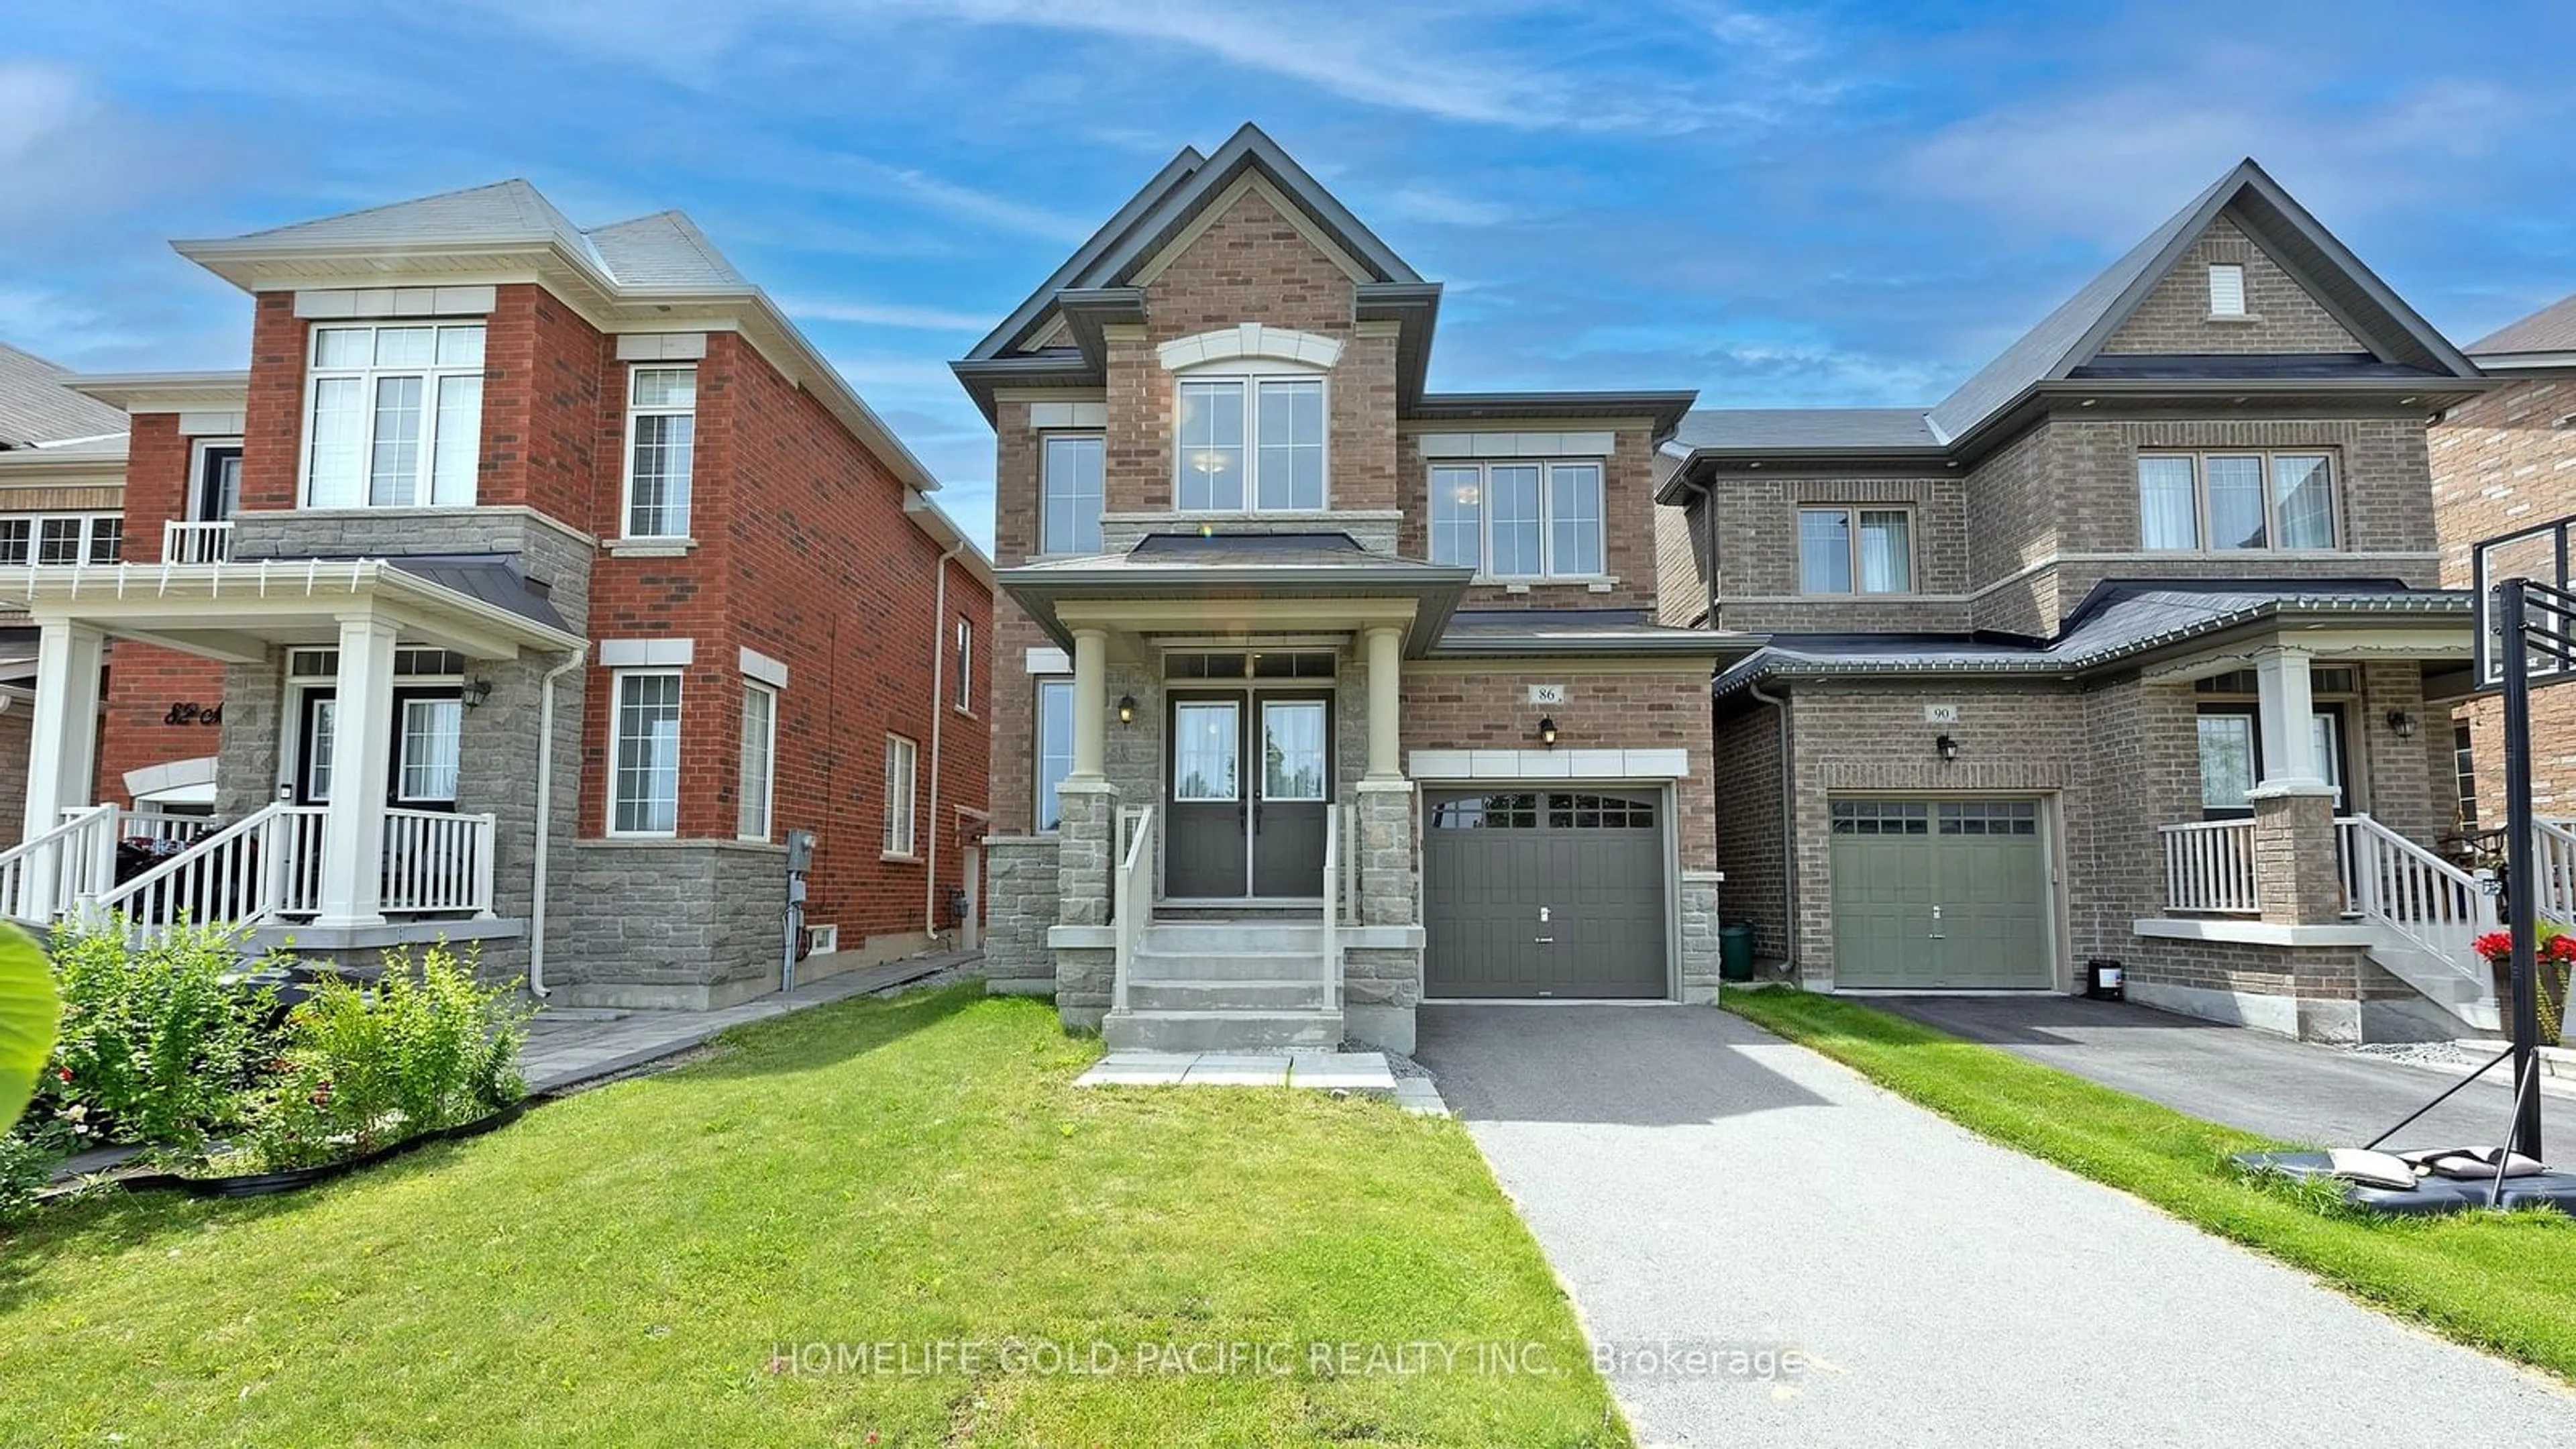 Home with brick exterior material for 86 Mactier Dr, Vaughan Ontario L0J 1C0